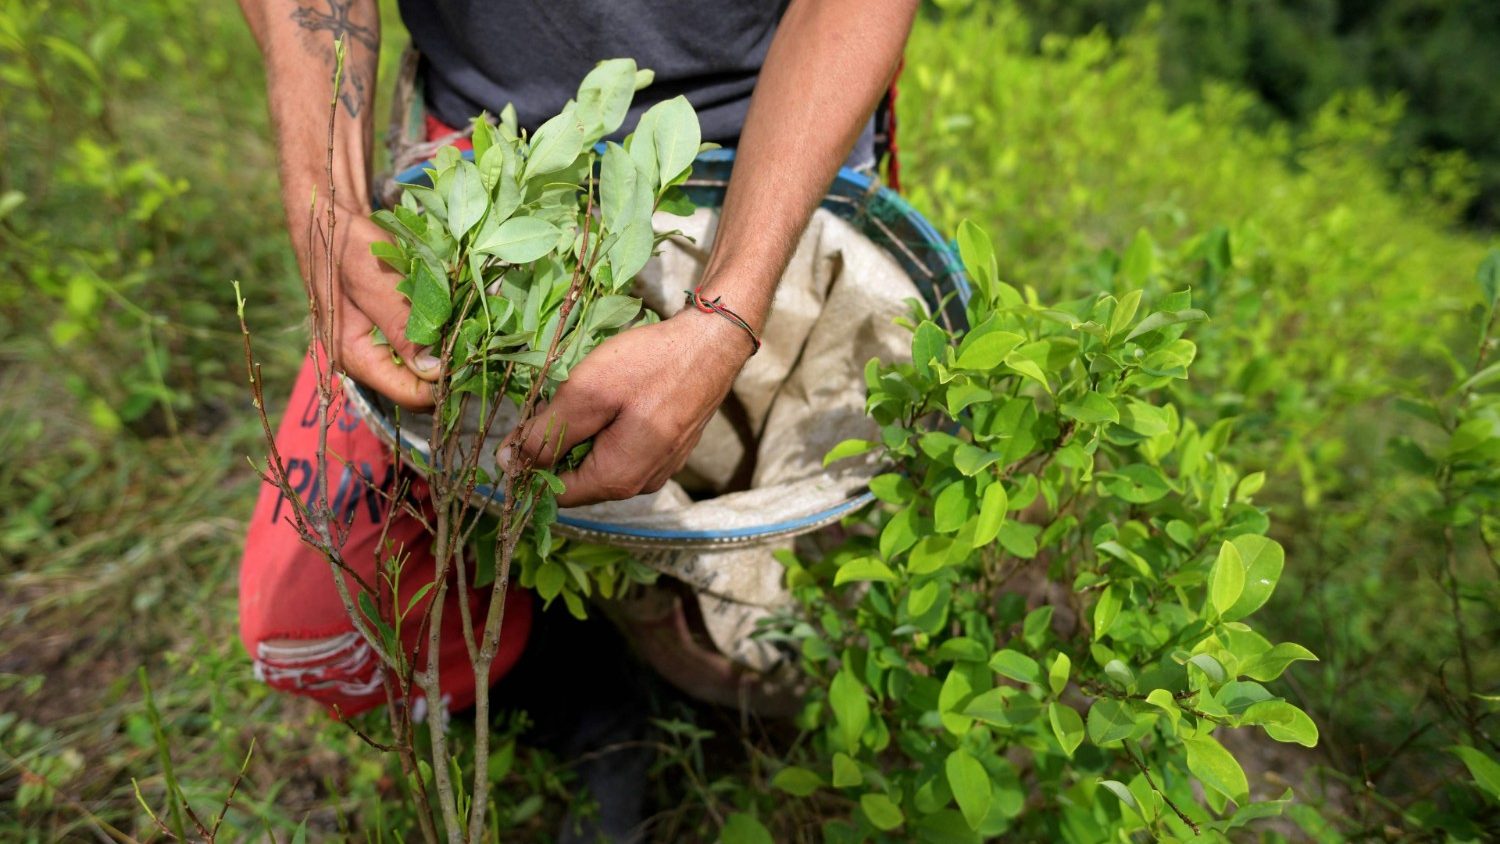 Colombia Shattered Records for Coca Cultivation in 2022, UN Says